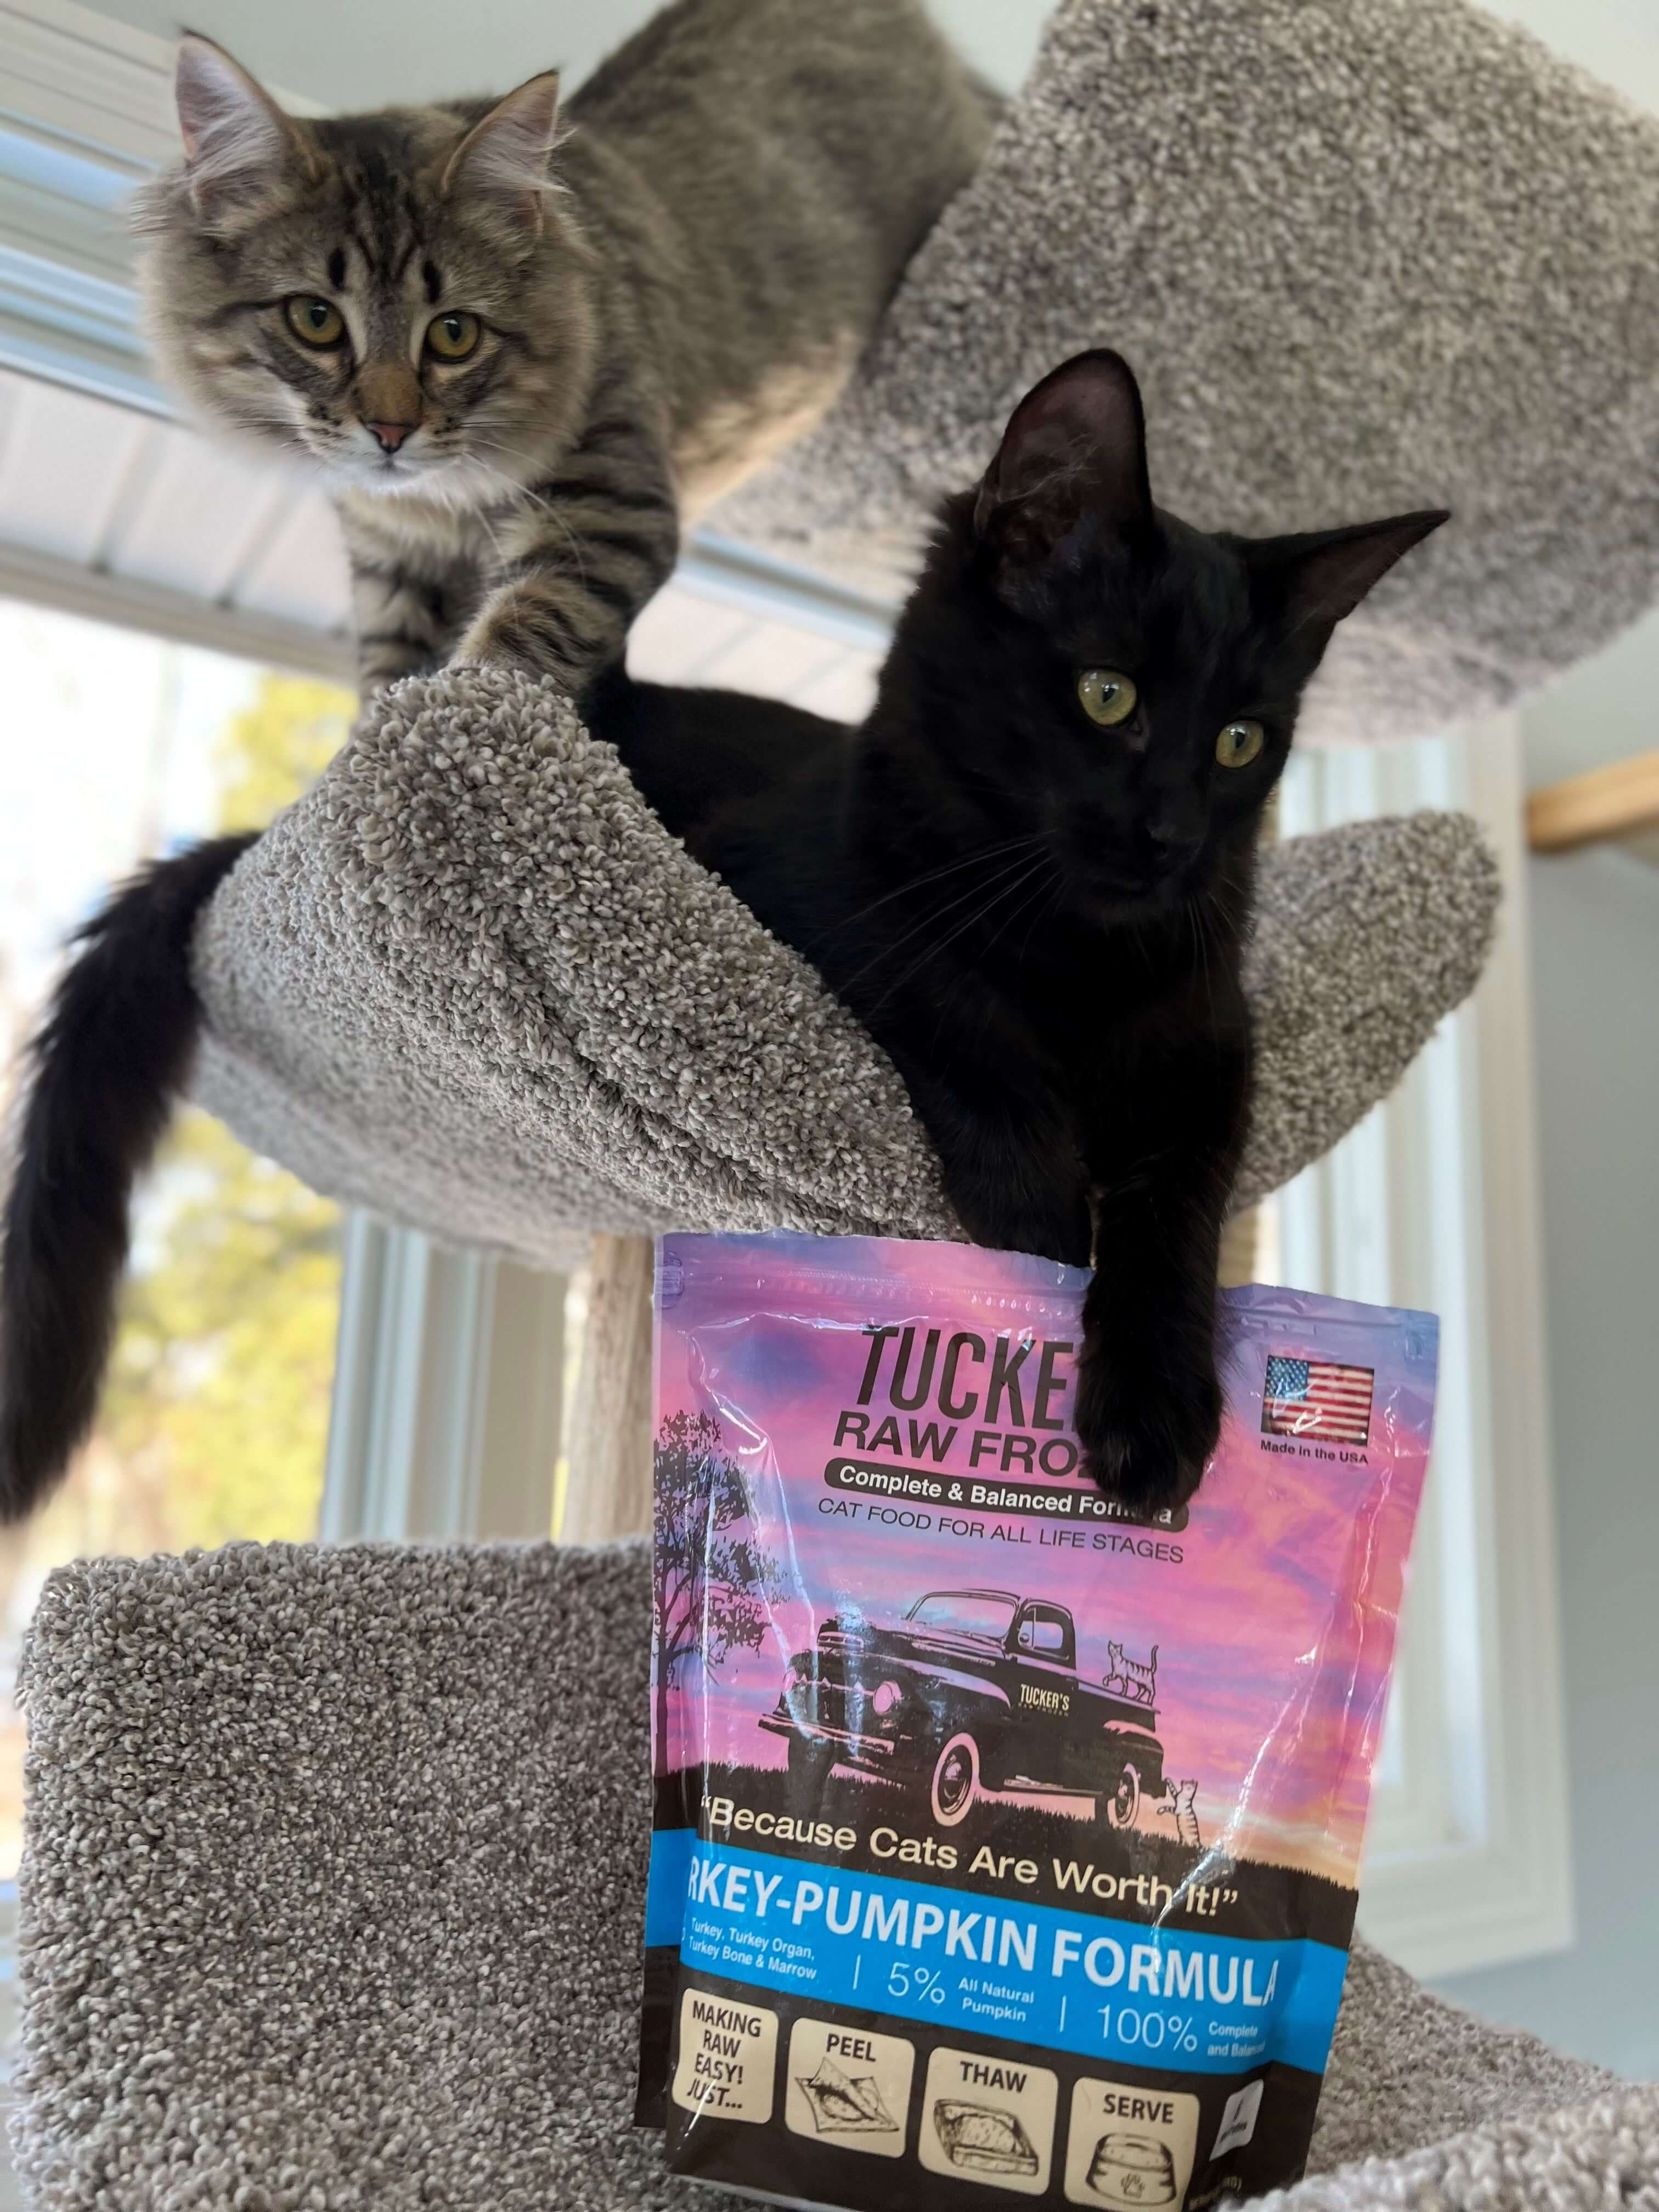 Cats in cat tree reaching for a bag of Tucker's